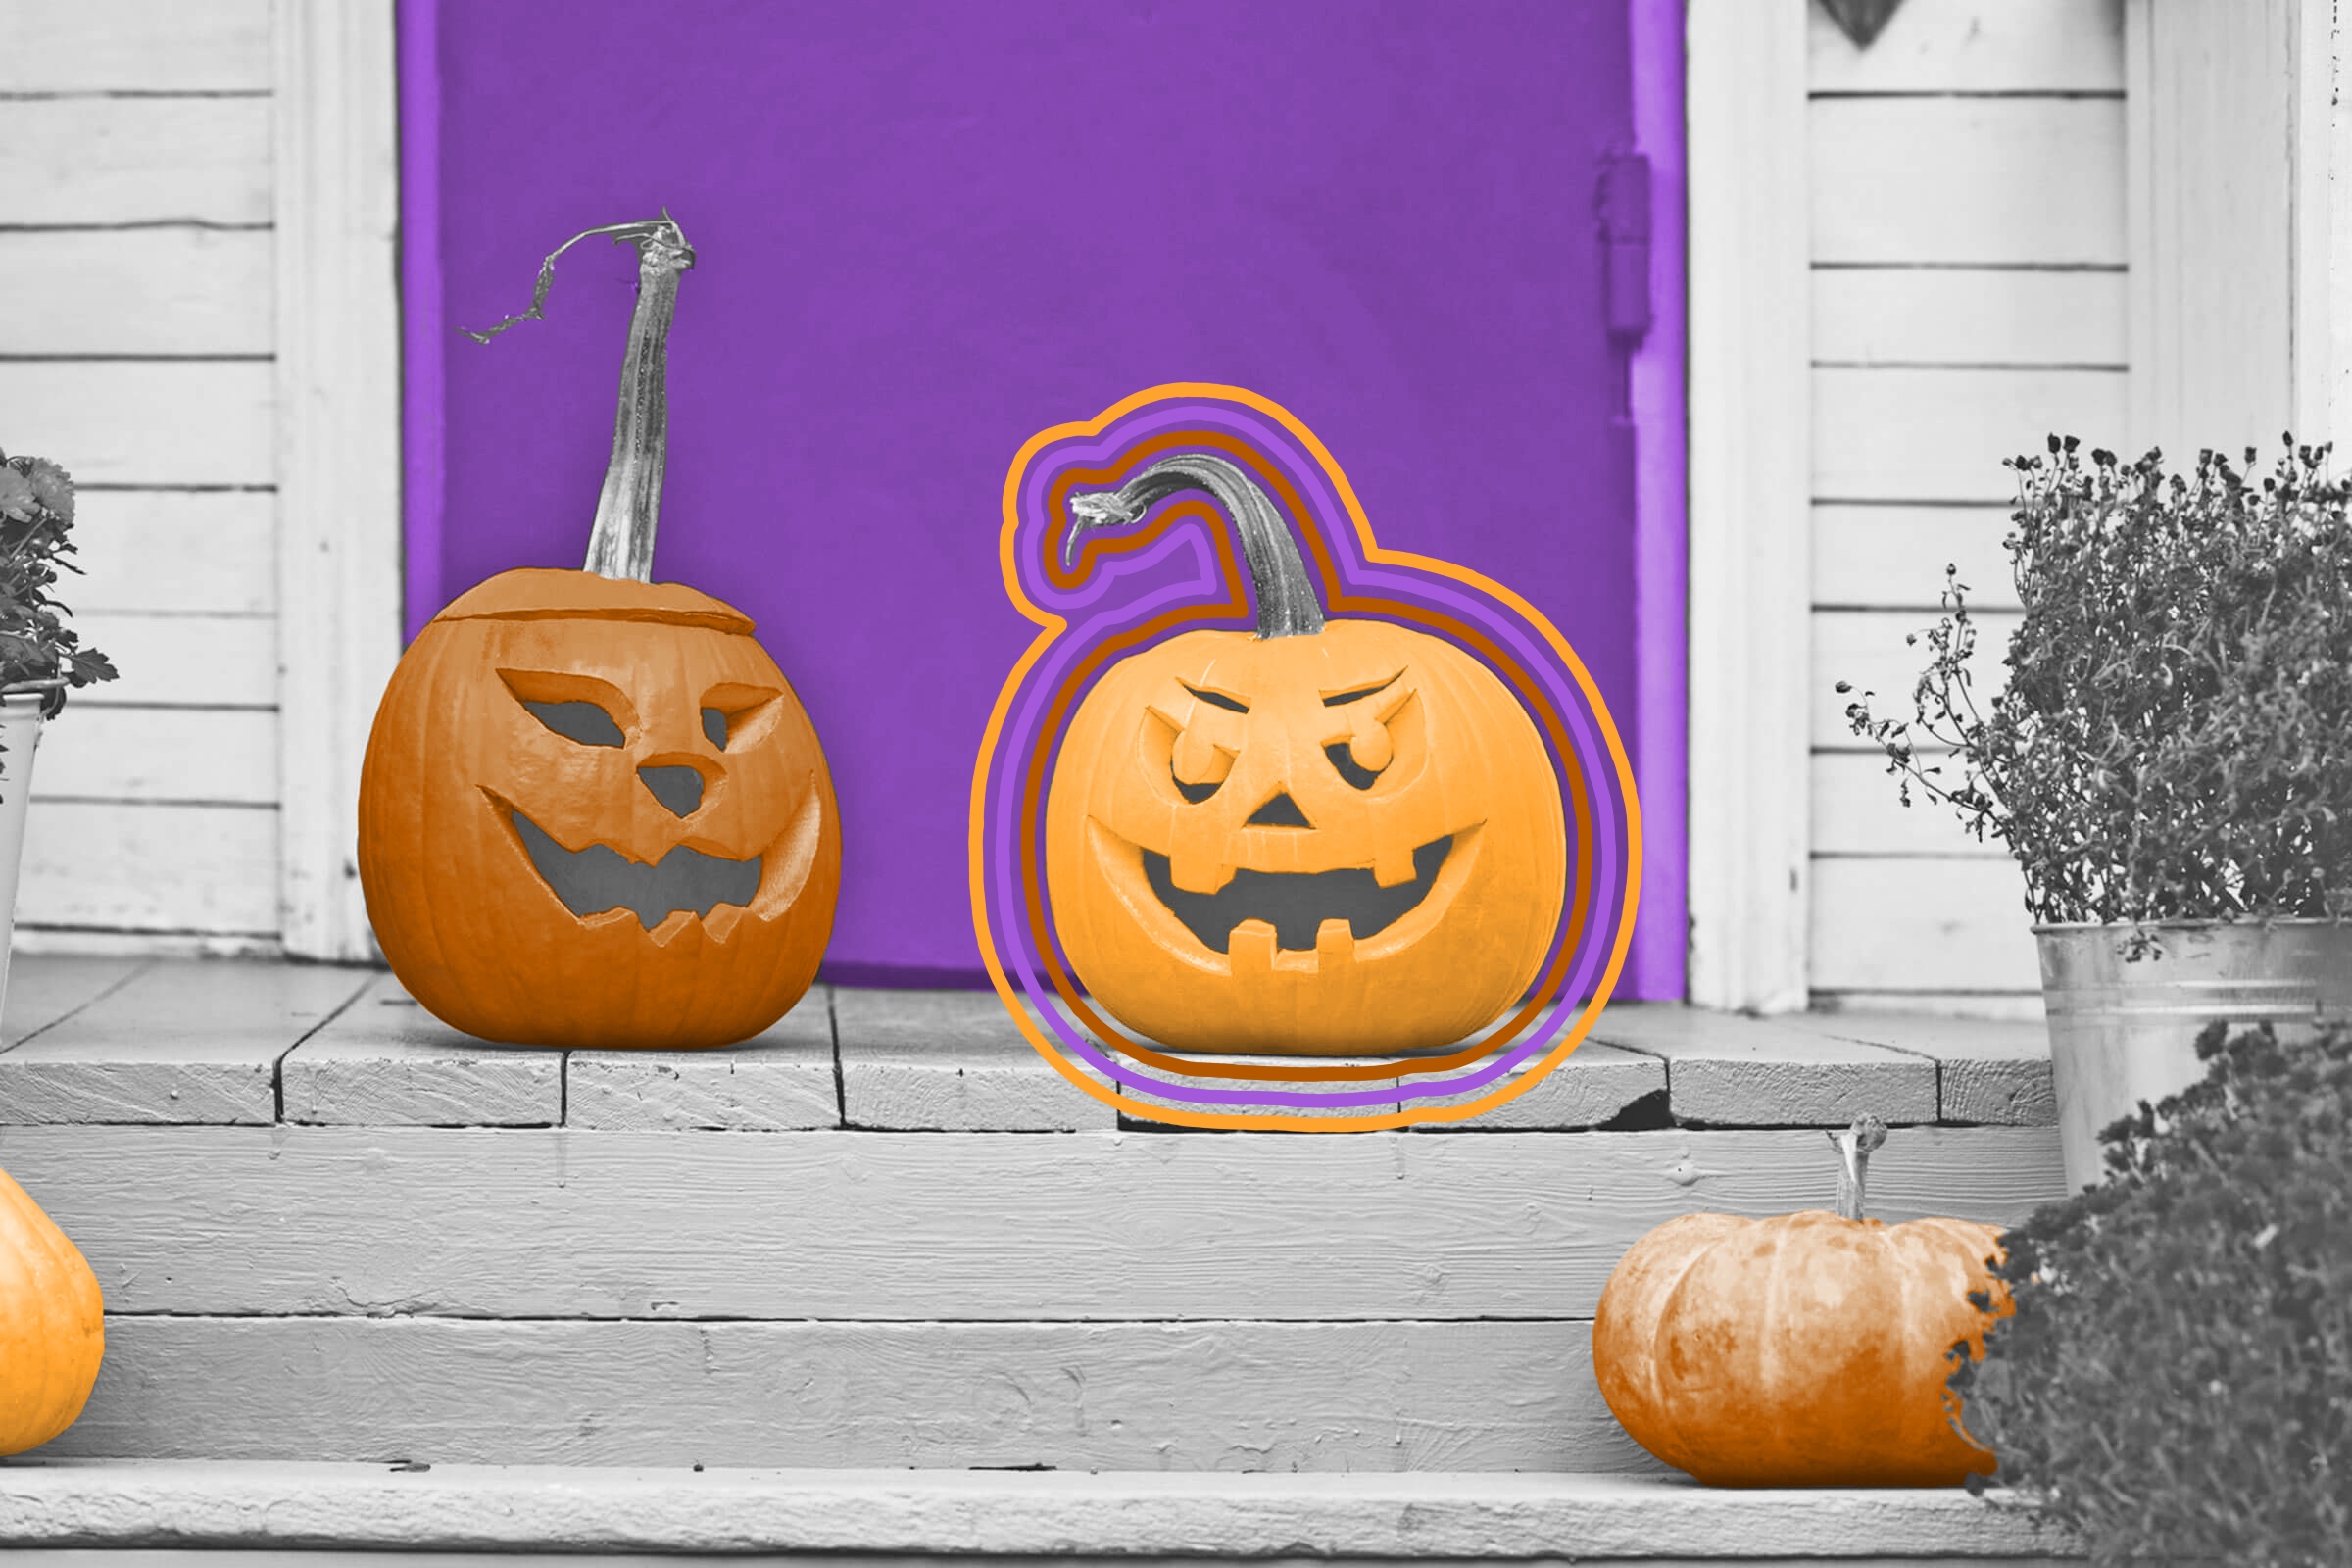 Jack-o’-lanterns come from an Irish myth about a man named Stingy Jack.